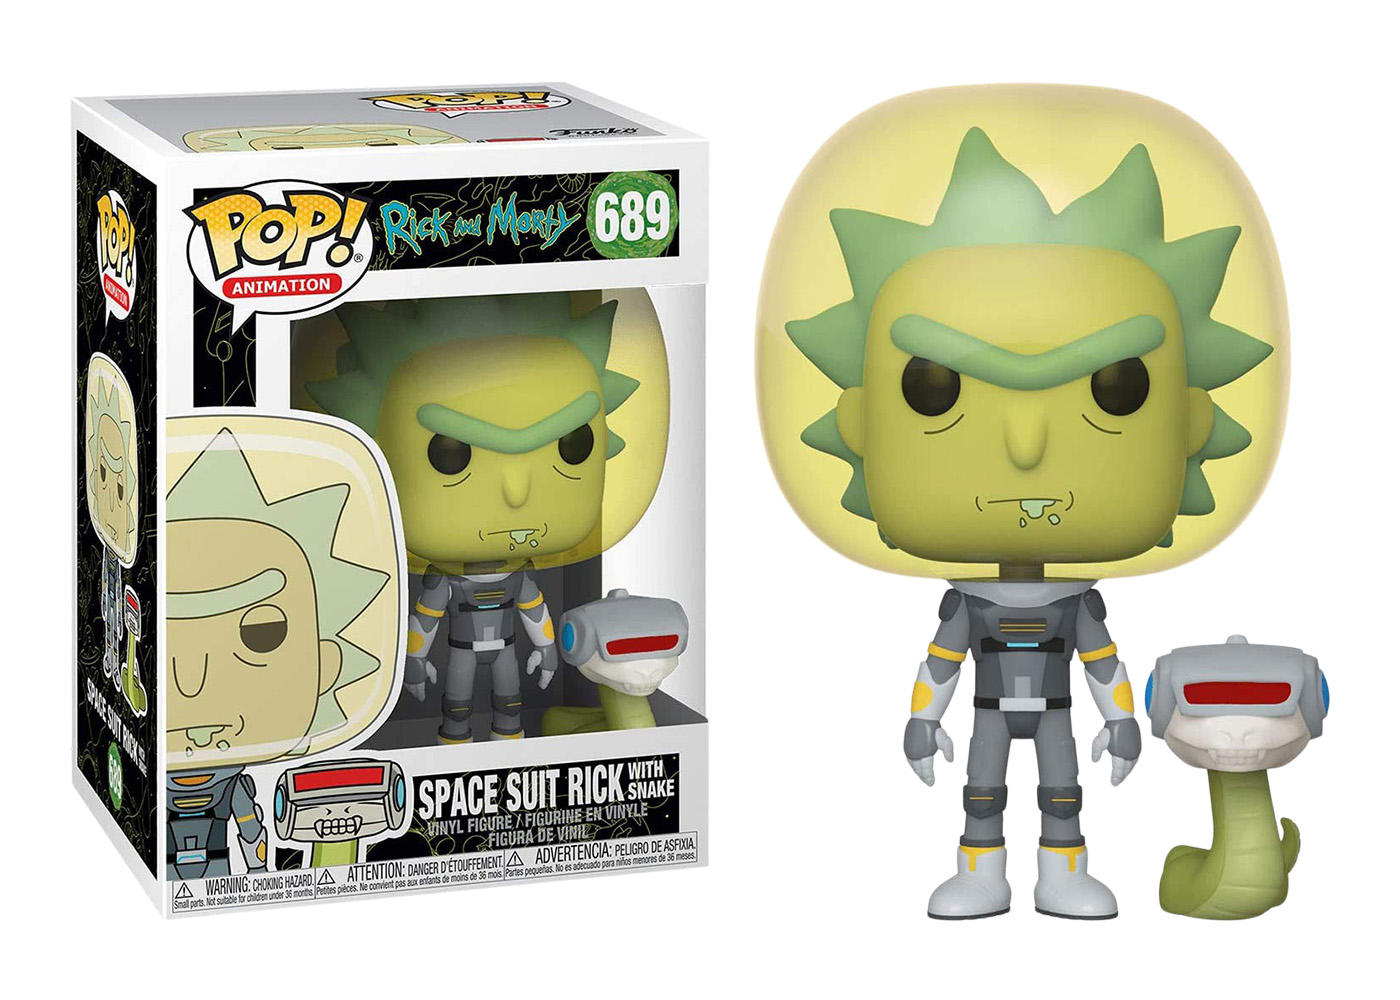 Funko Pop! Animation Rick & Morty Space Suit Rick with Snake